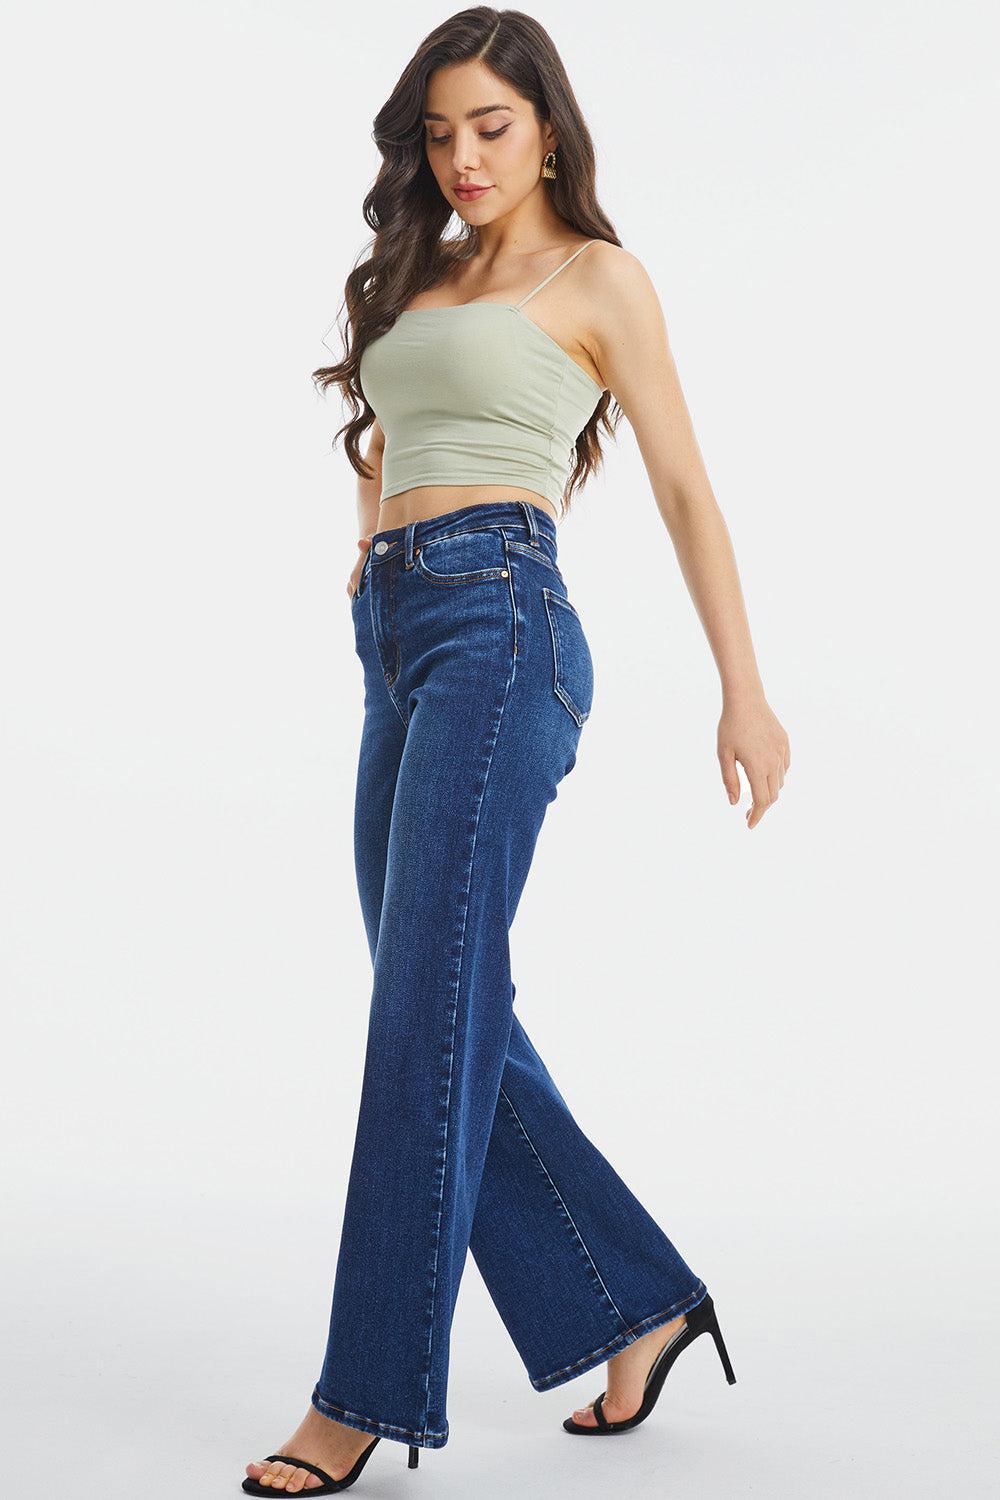 a woman wearing high rise jeans and a crop top